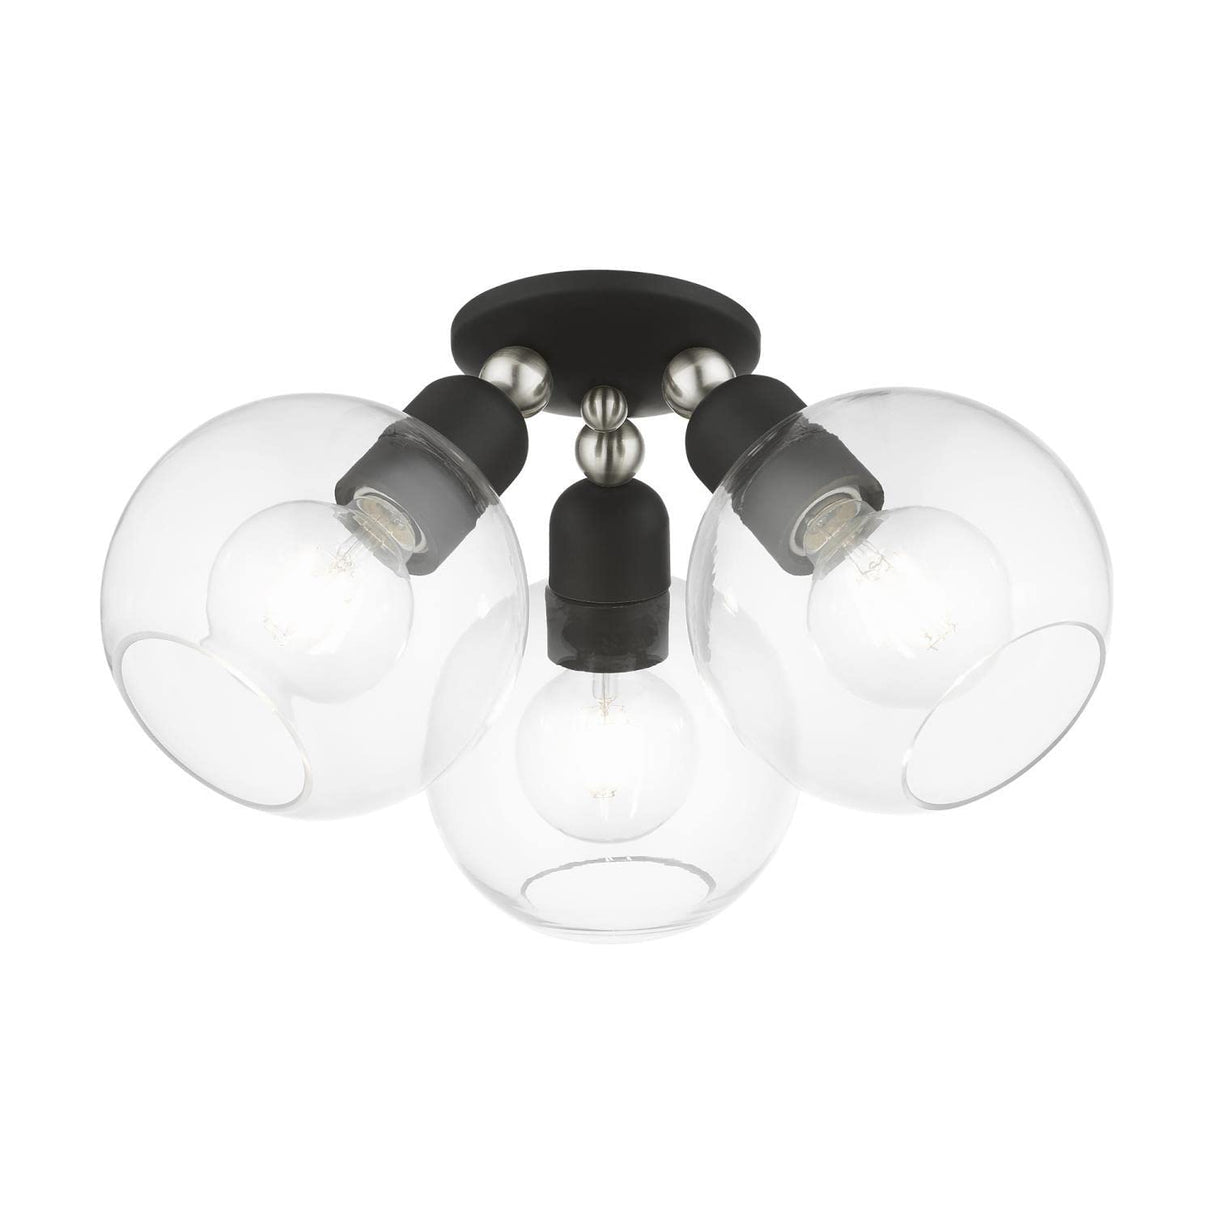 Downtown 3 Light Semi-Flush in Black with Brushed Nickel (48978-04)